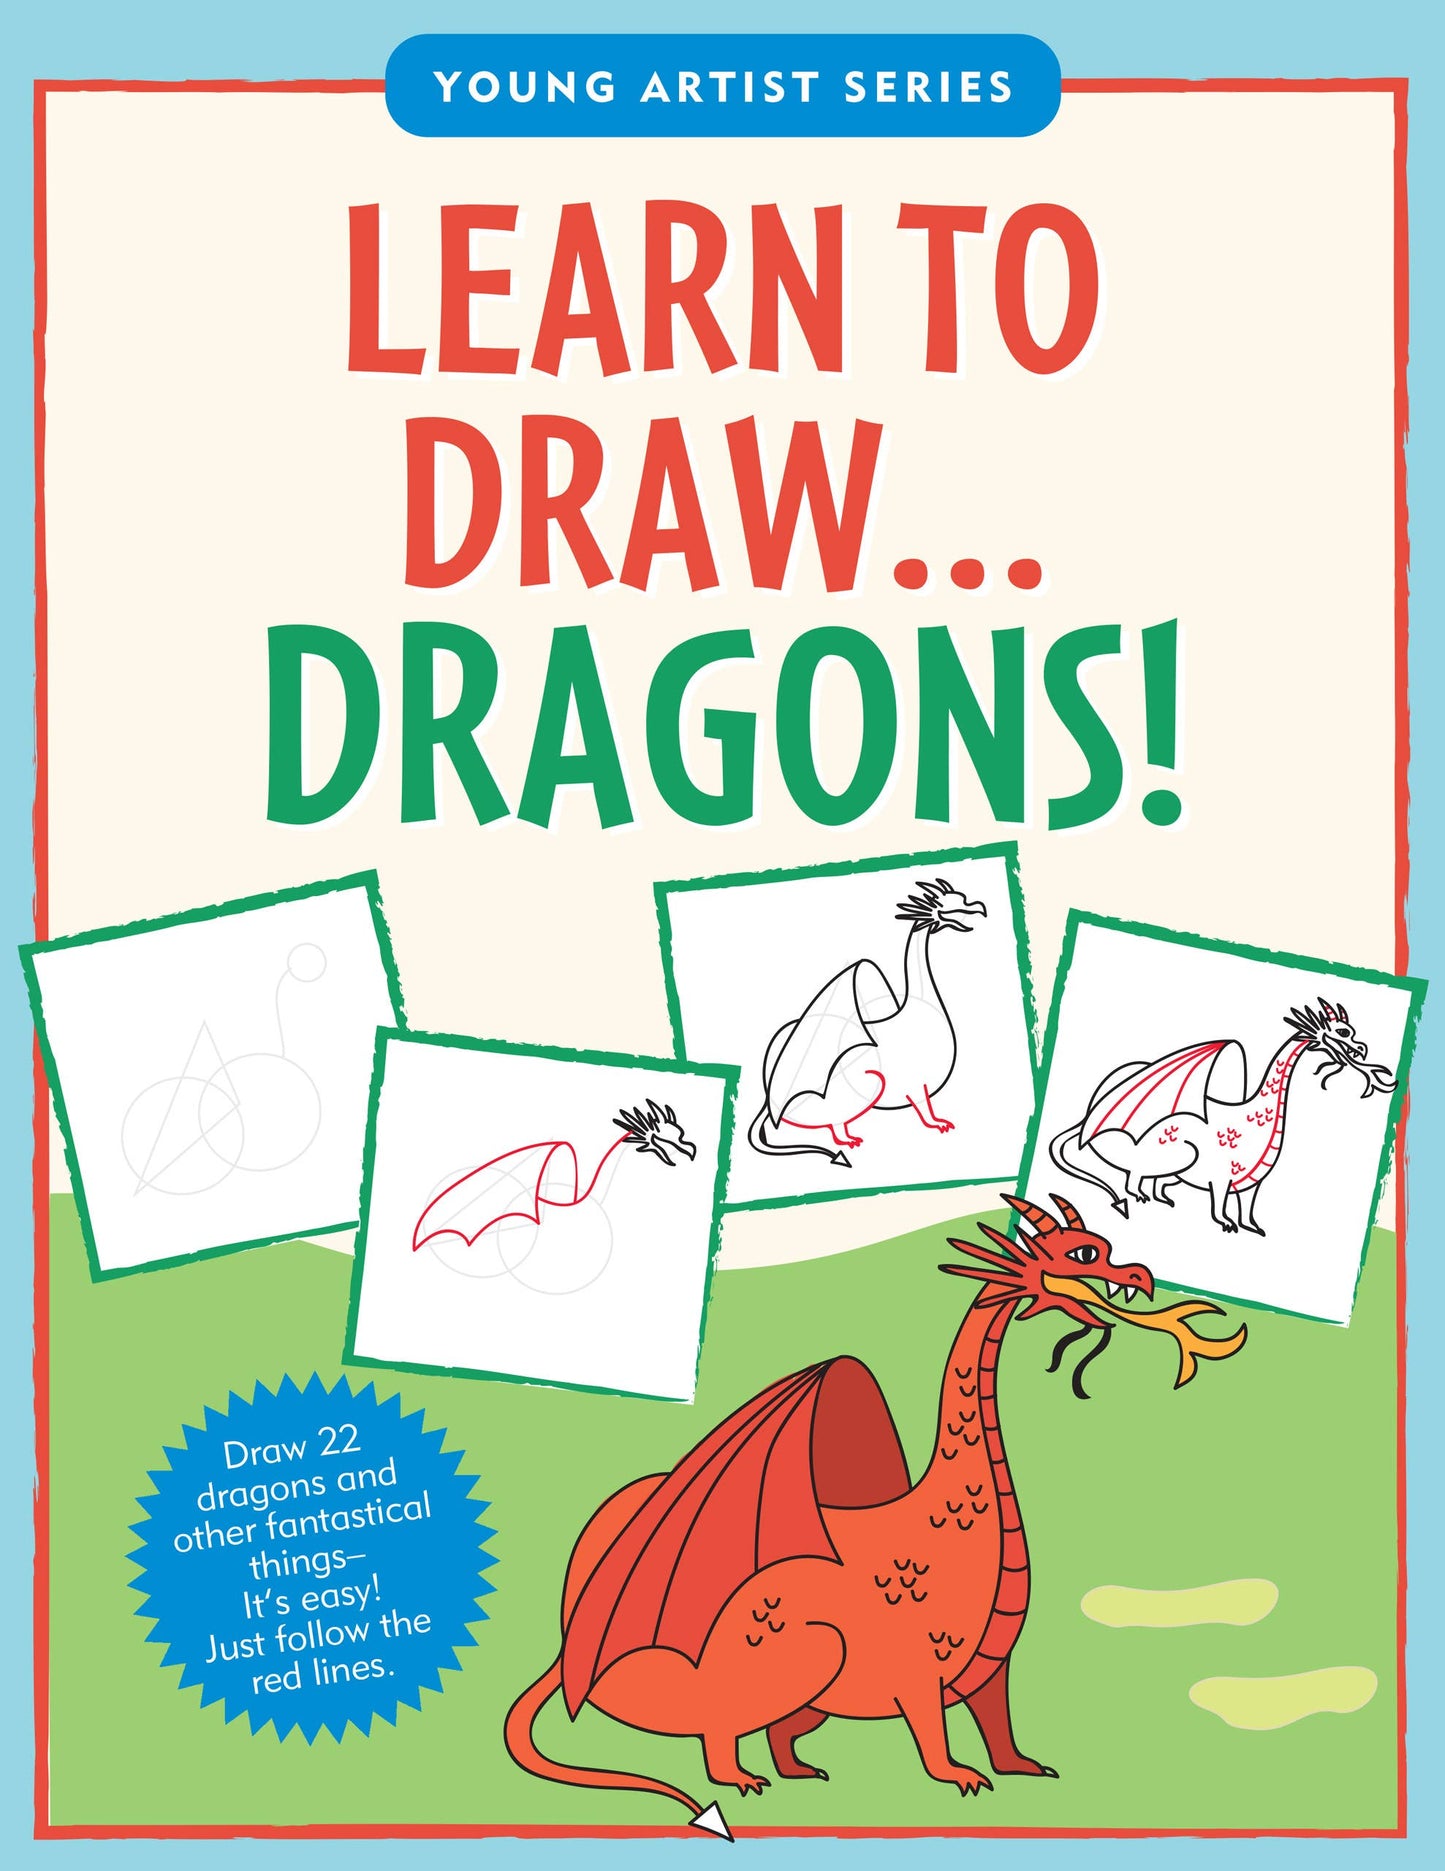 Peter Pauper Press - Learn to Draw Dragons!